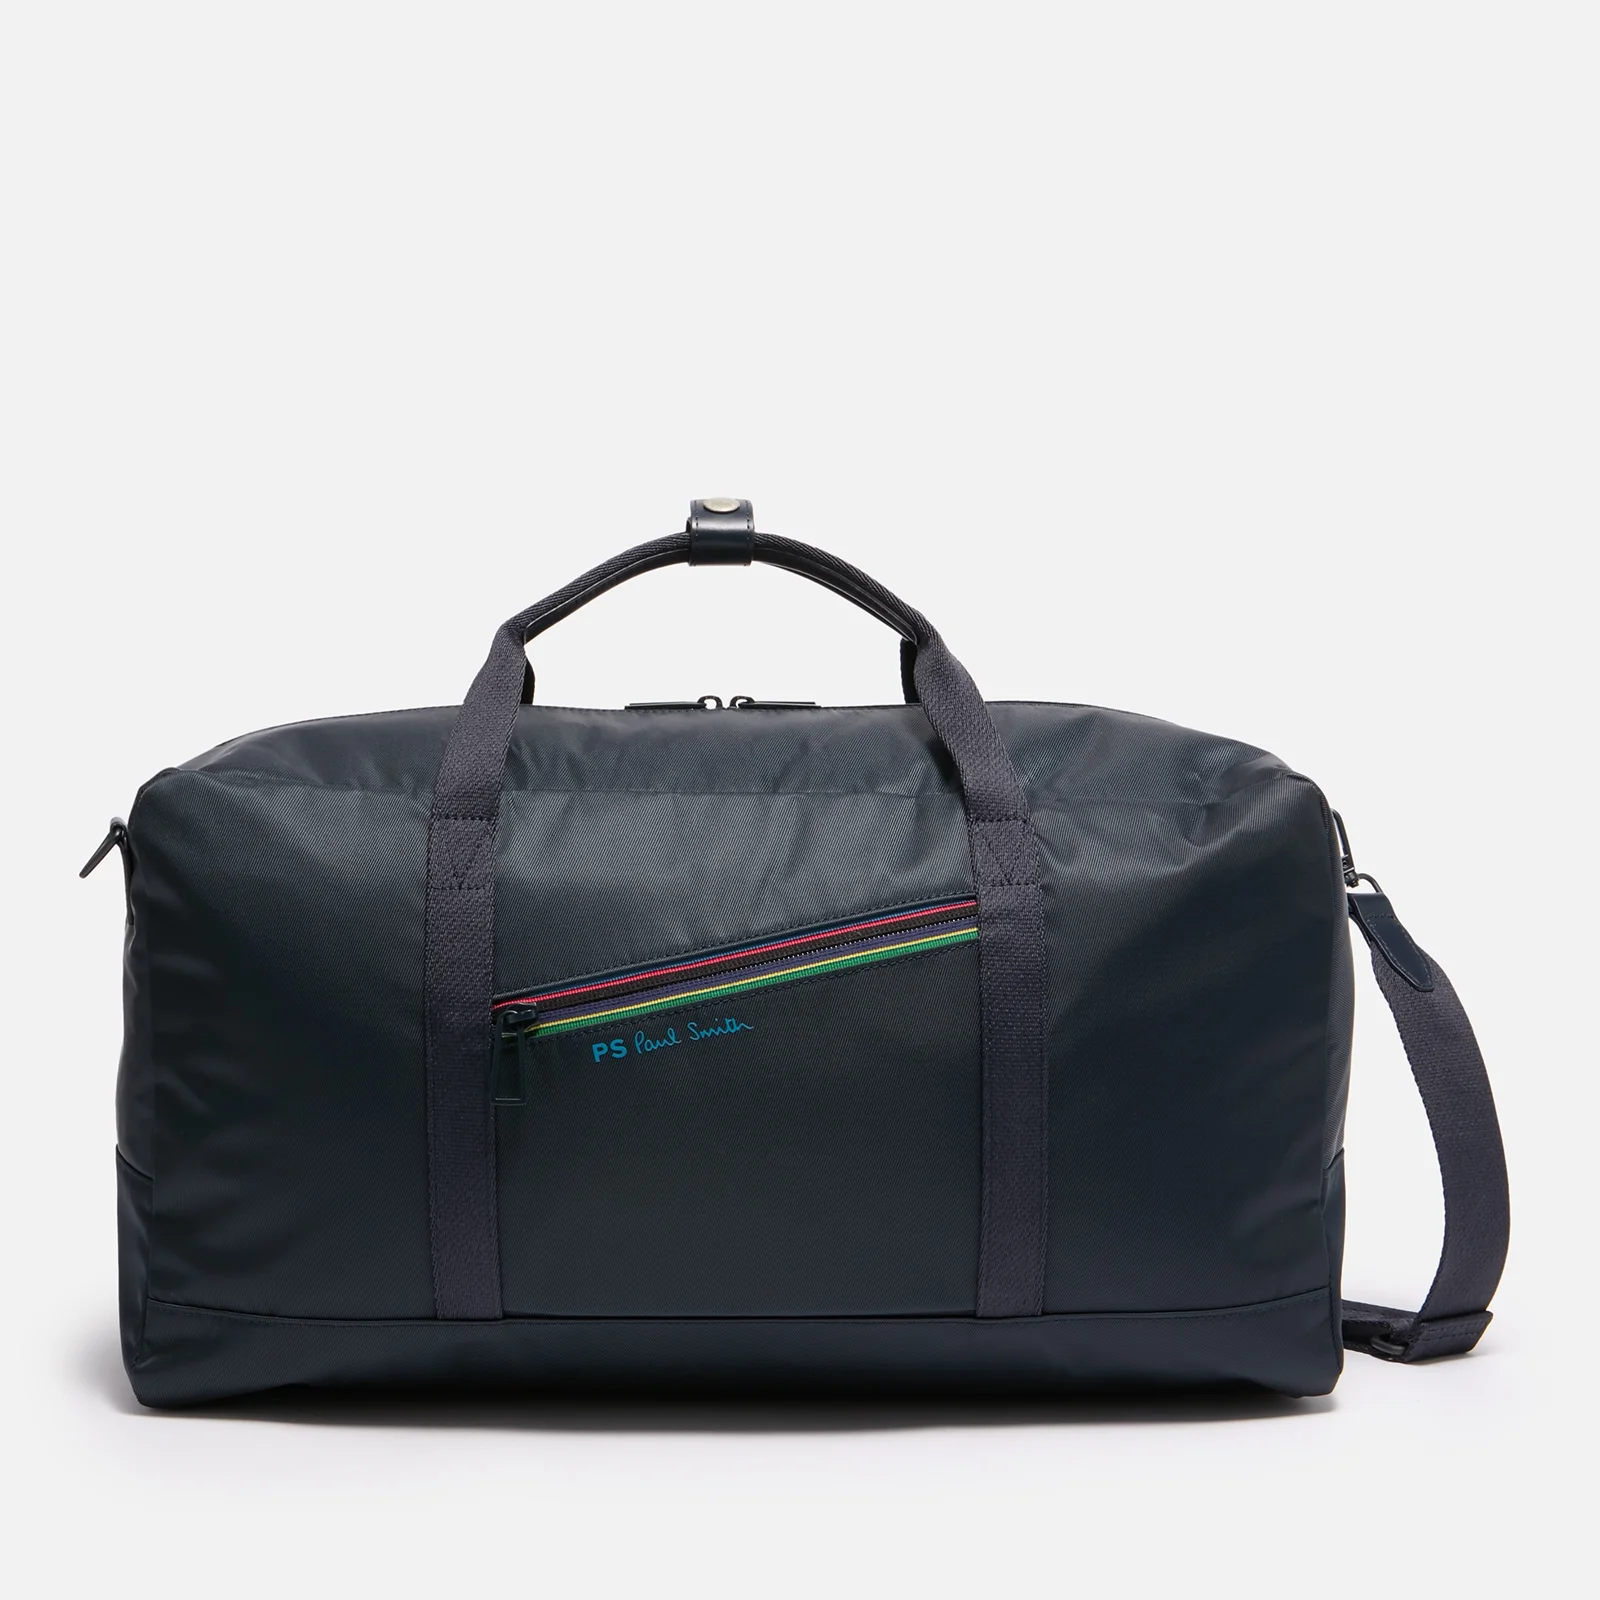 PS Paul Smith Canvas Weekend Bag Image 1